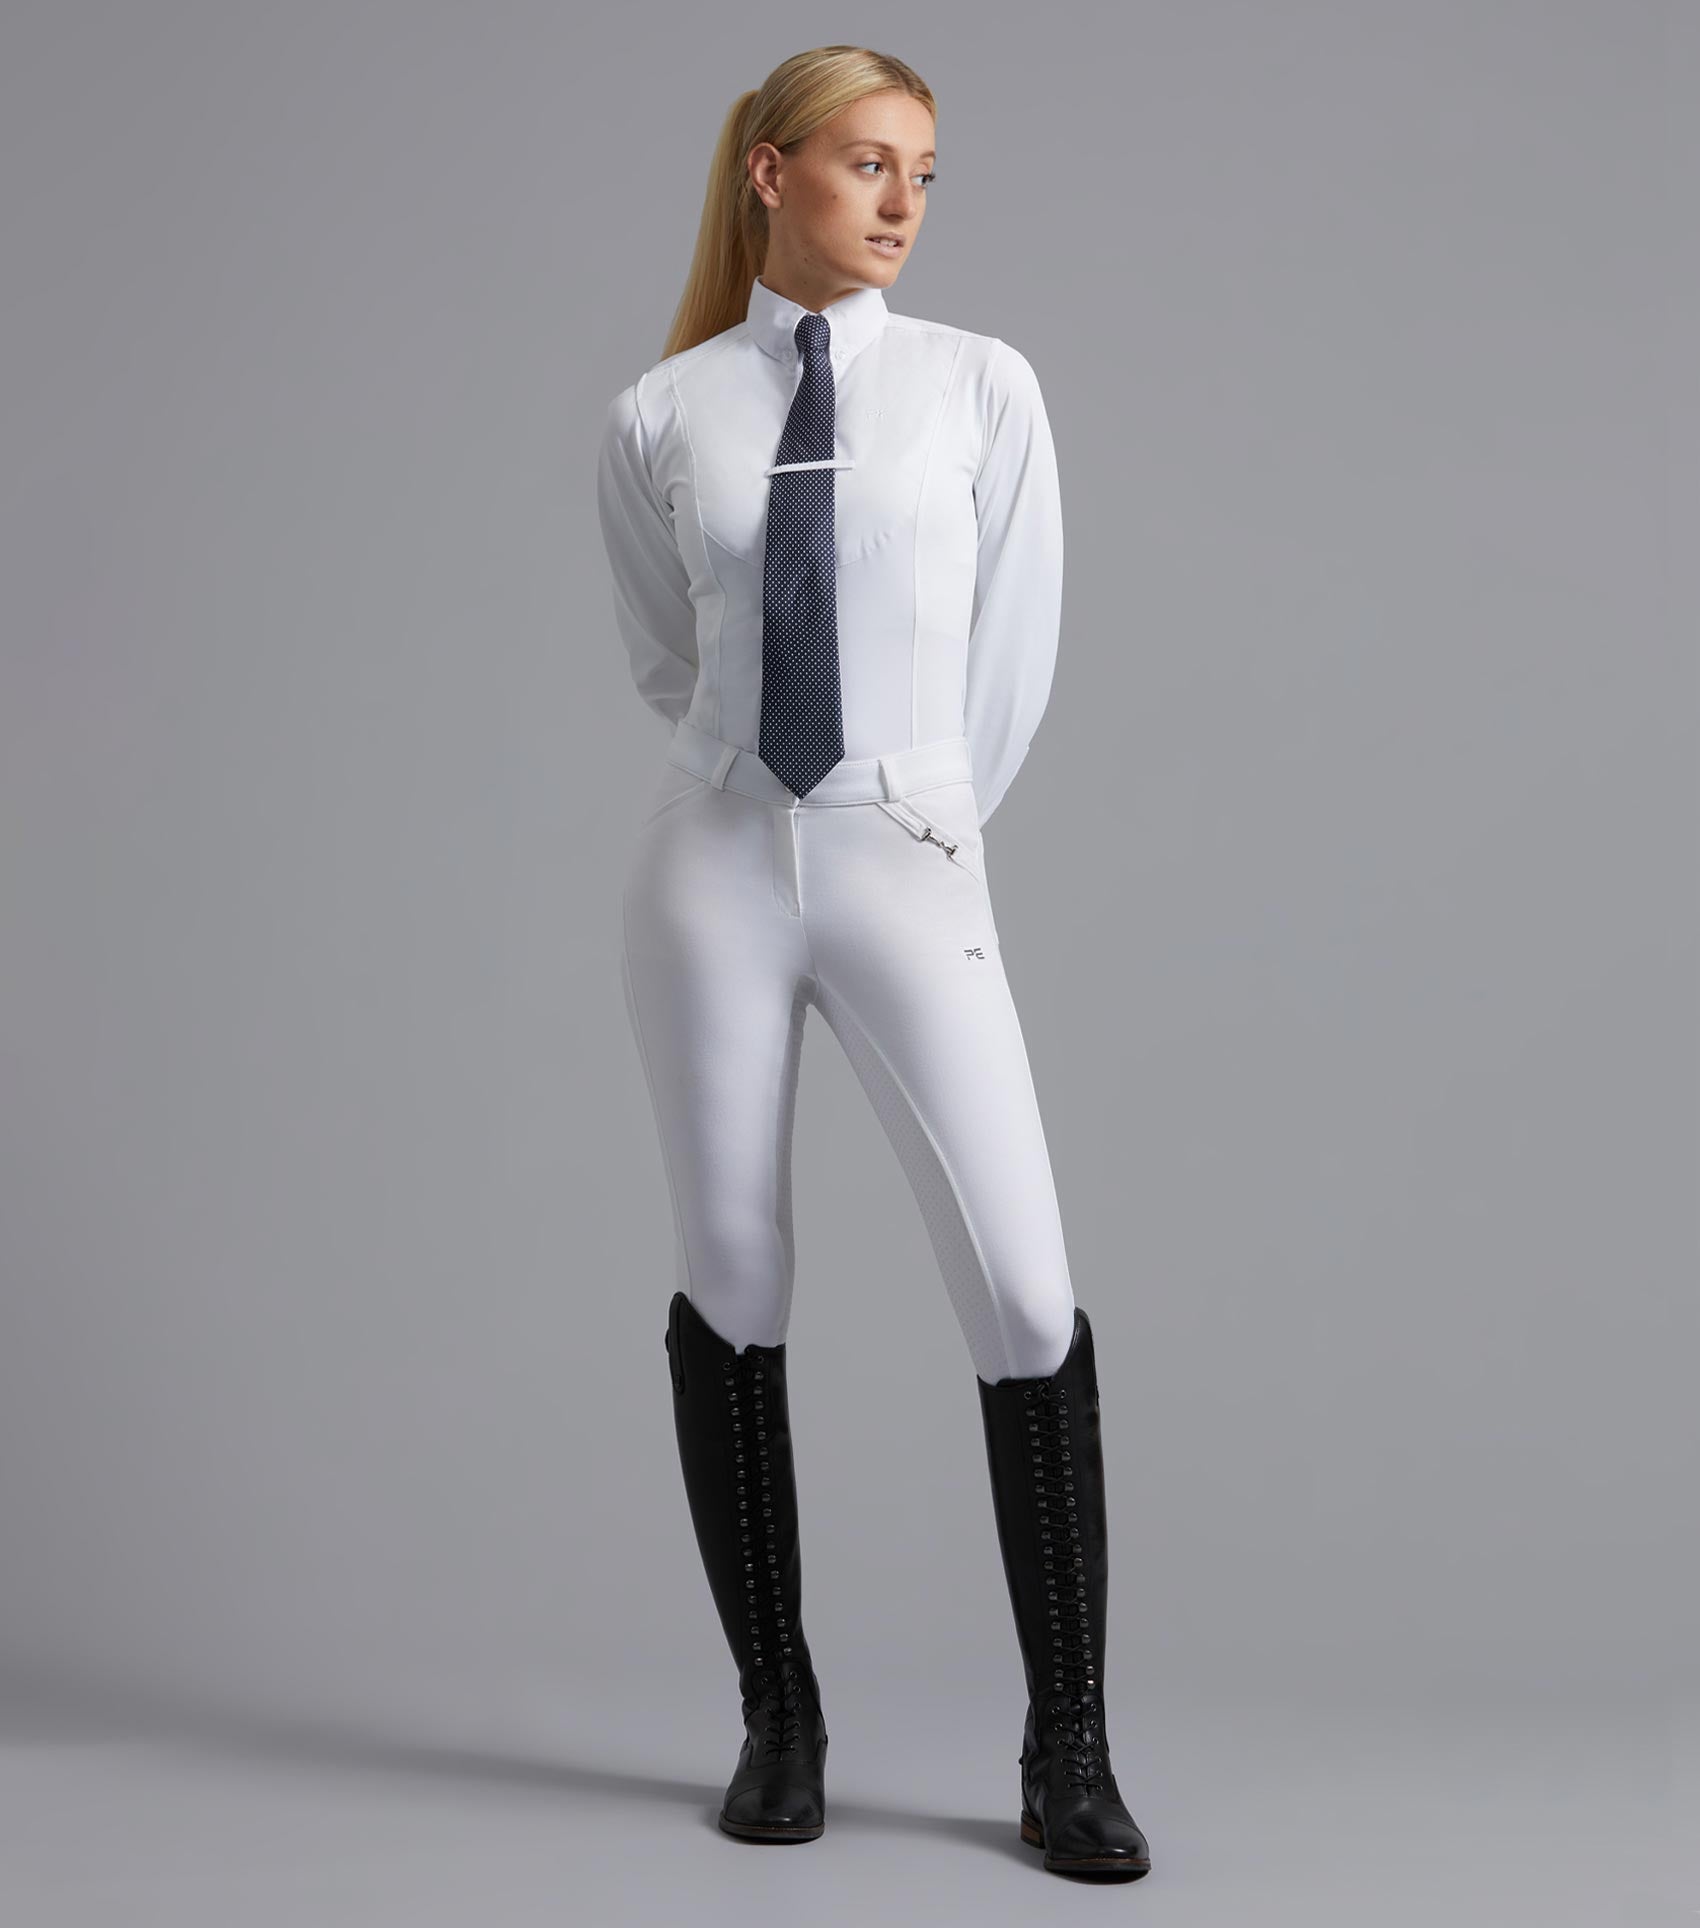 Delta Ladies Full Seat Gel Competition Riding Breeches - White